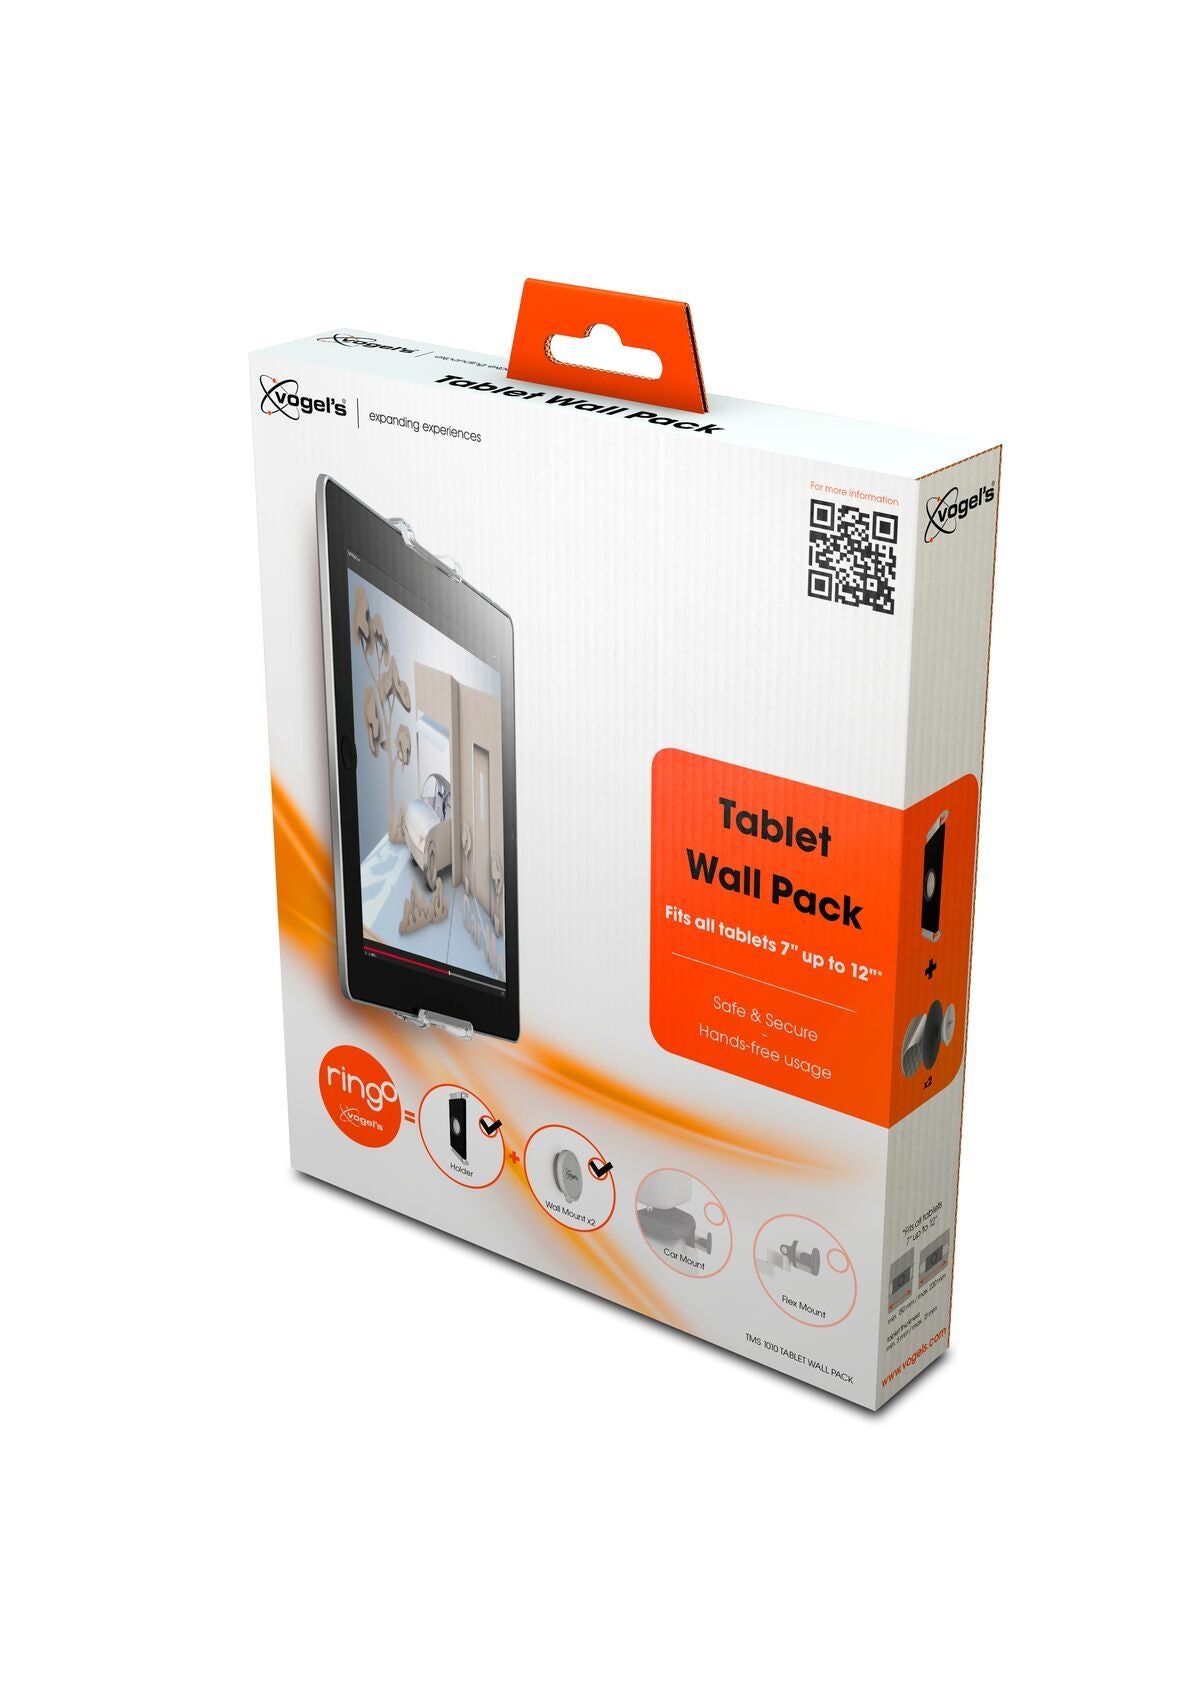 Vogel's TMS 1010 Tablet Wall Pack